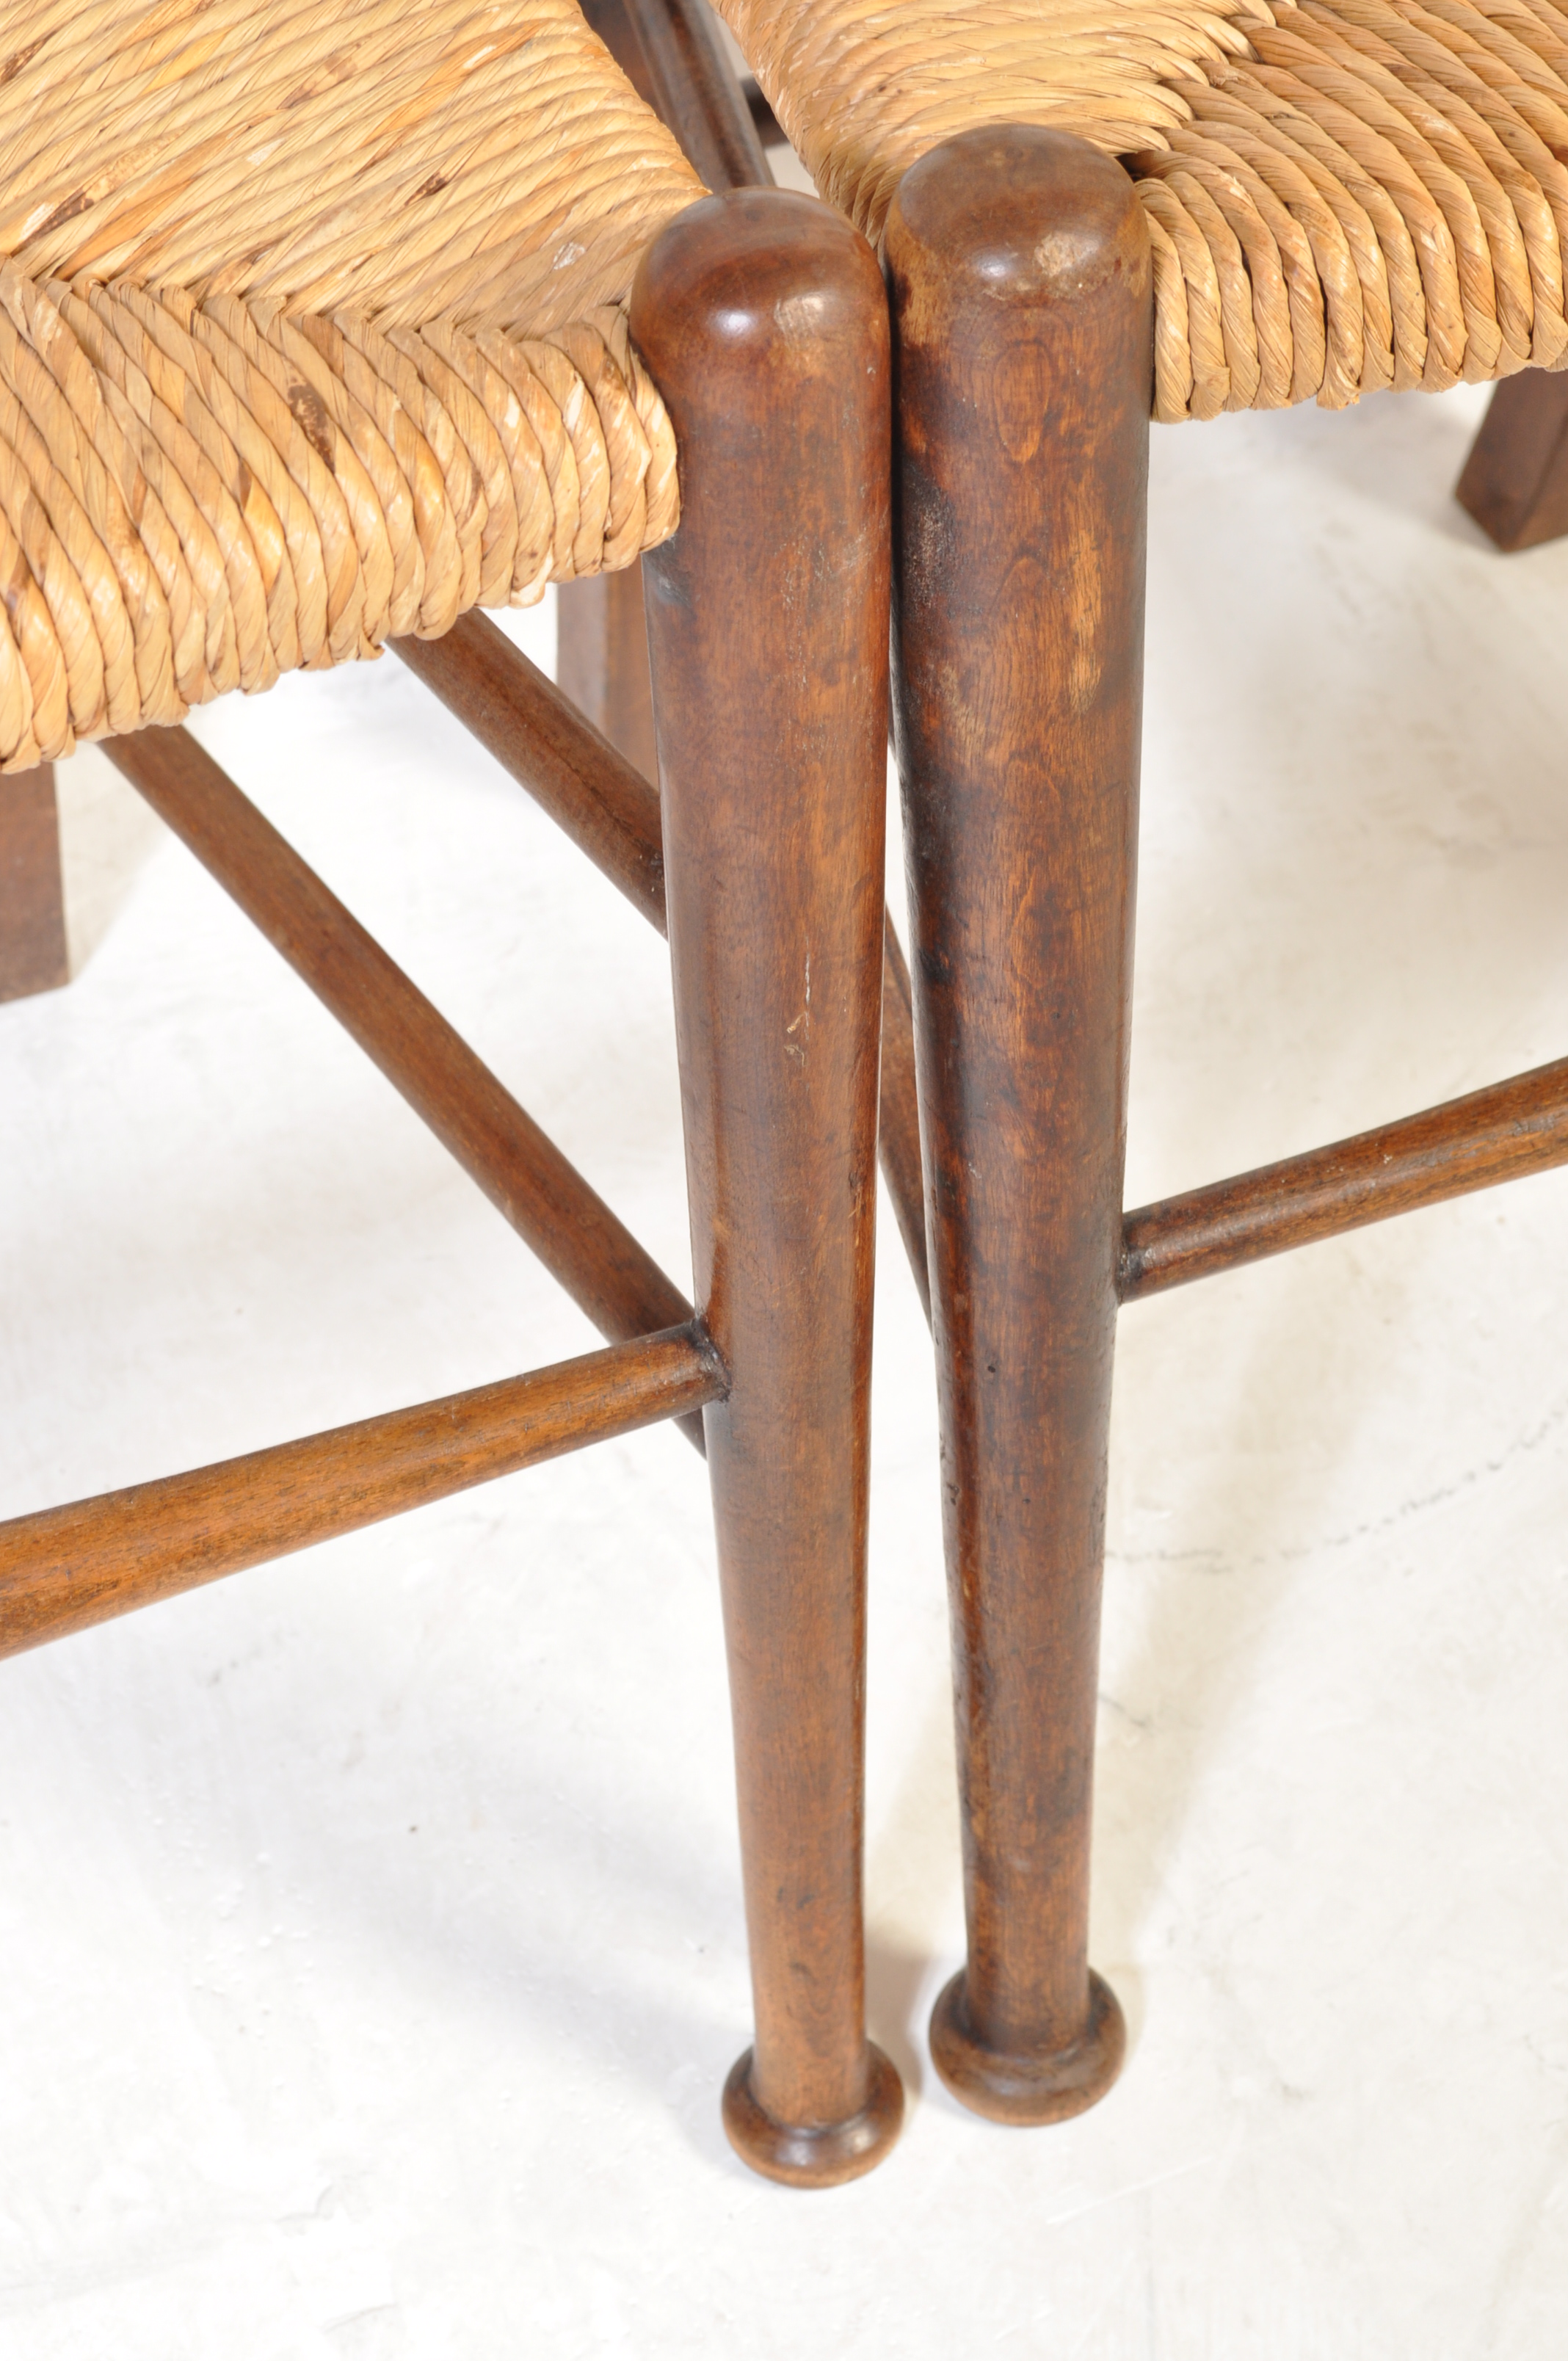 FOUR VINTAGE MID 20TH CENTURY COUNTRY FARM HOUSE CHAIRS - Image 5 of 7